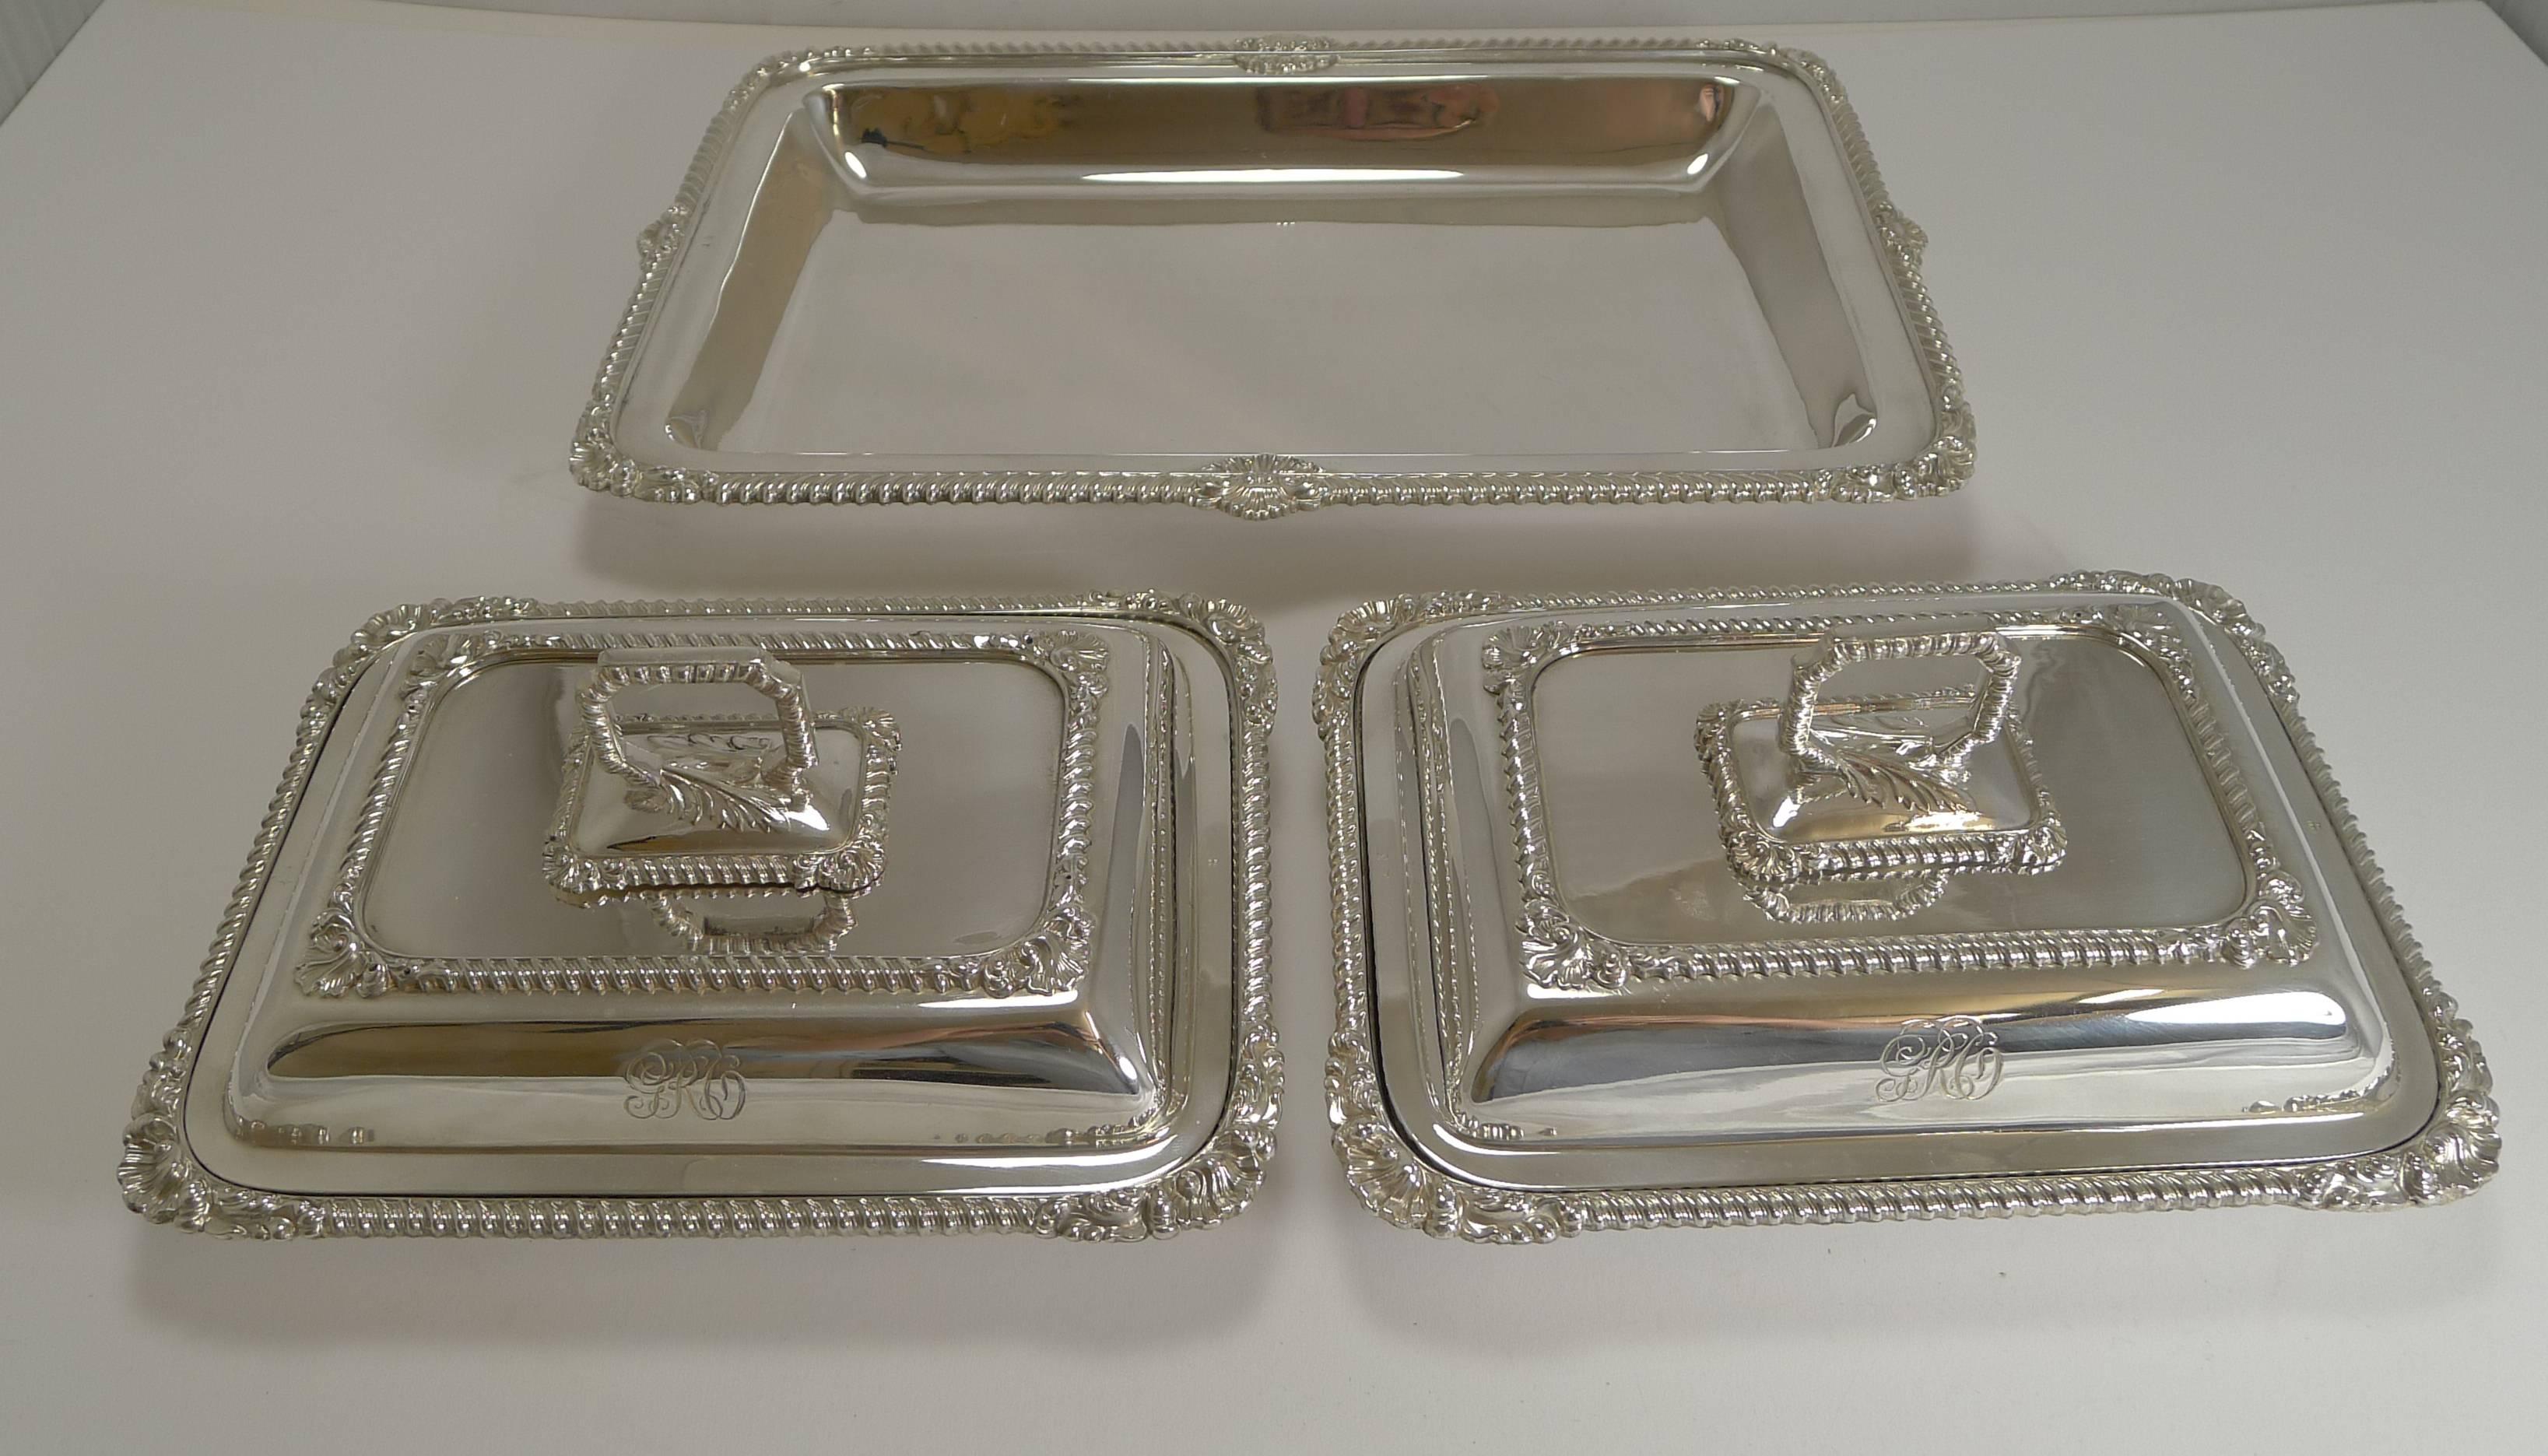 Plated Pair of Antique English Entree Dishes in Tray by James Dixon, circa 1890-1900